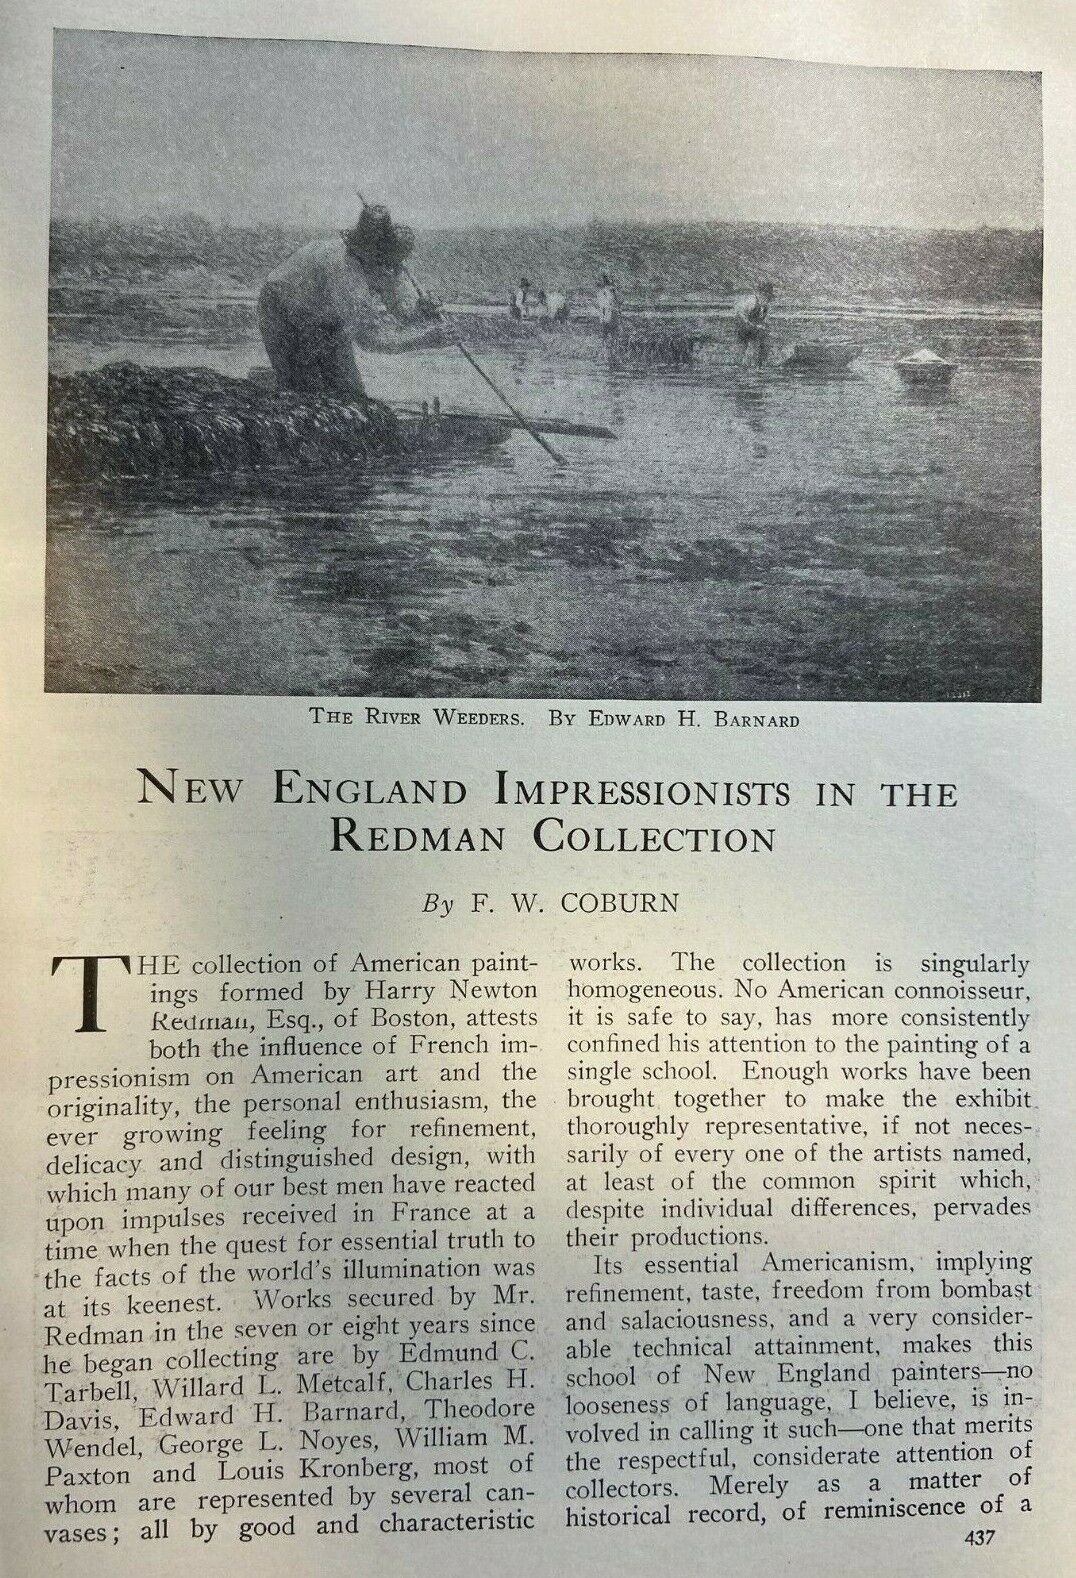 1910 New England Impressionist Artists in Redman Collection at Boston